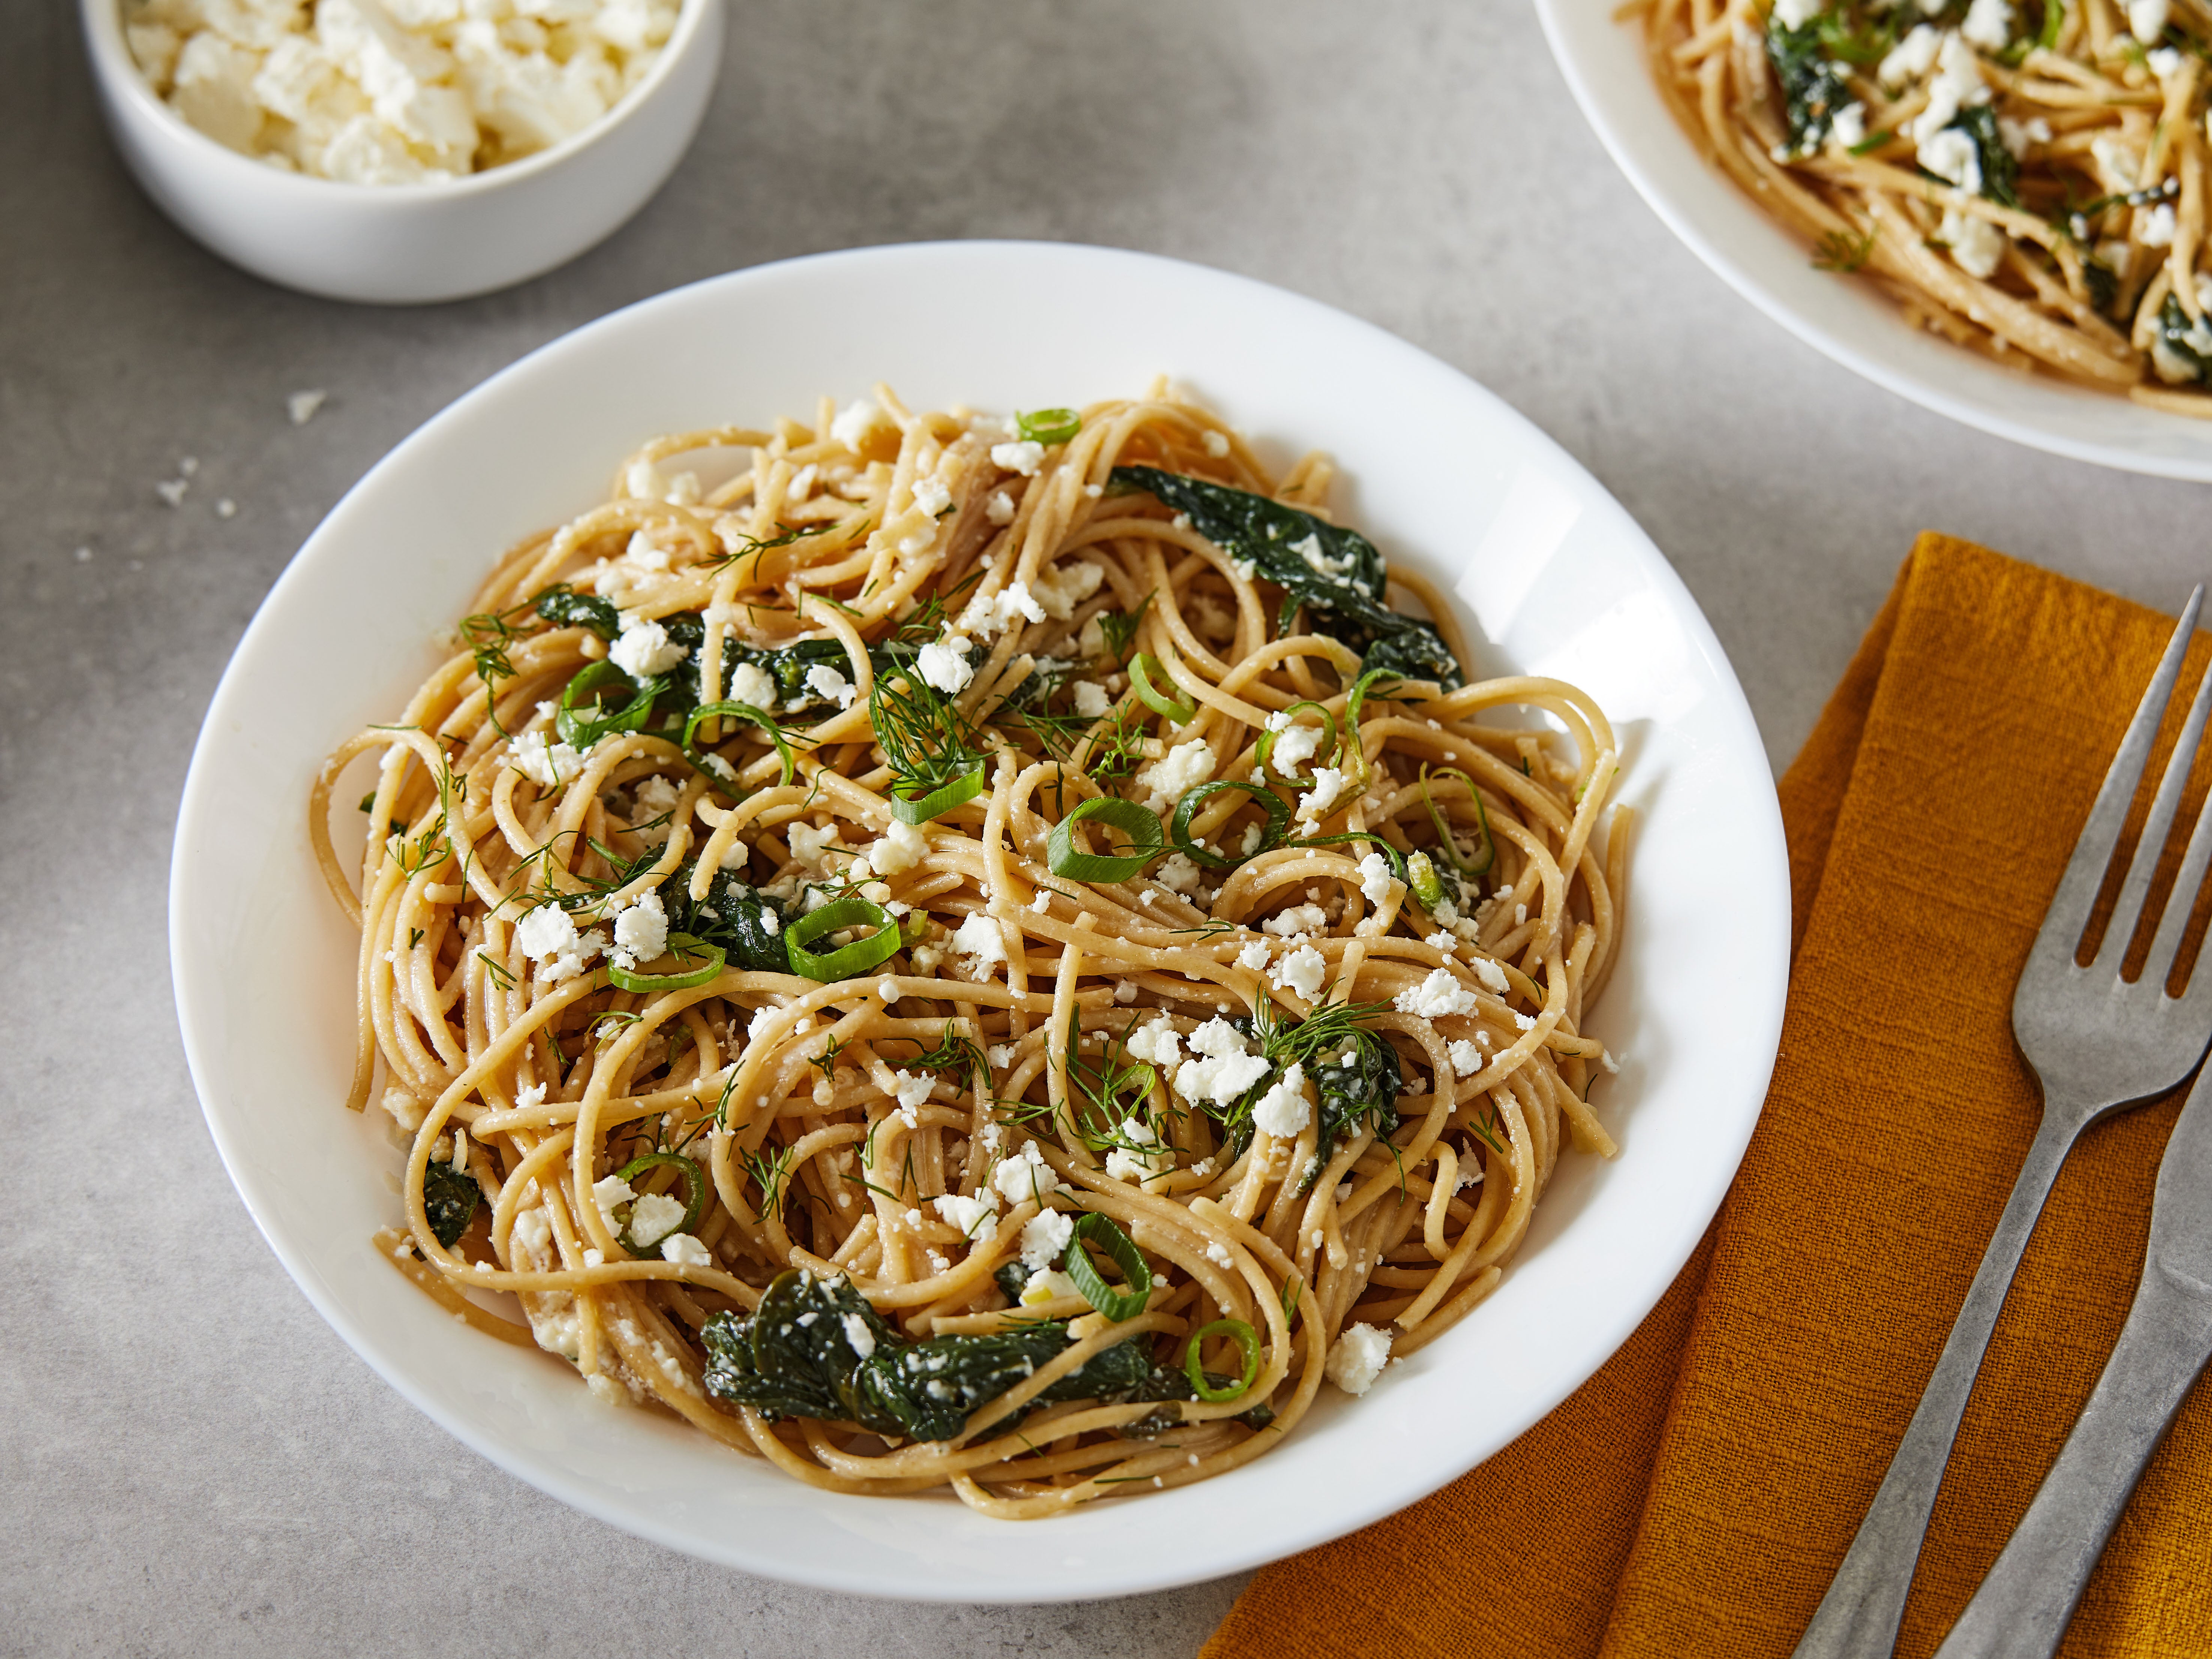 This easy, breezy dinner is done in the time it takes to cook the pasta